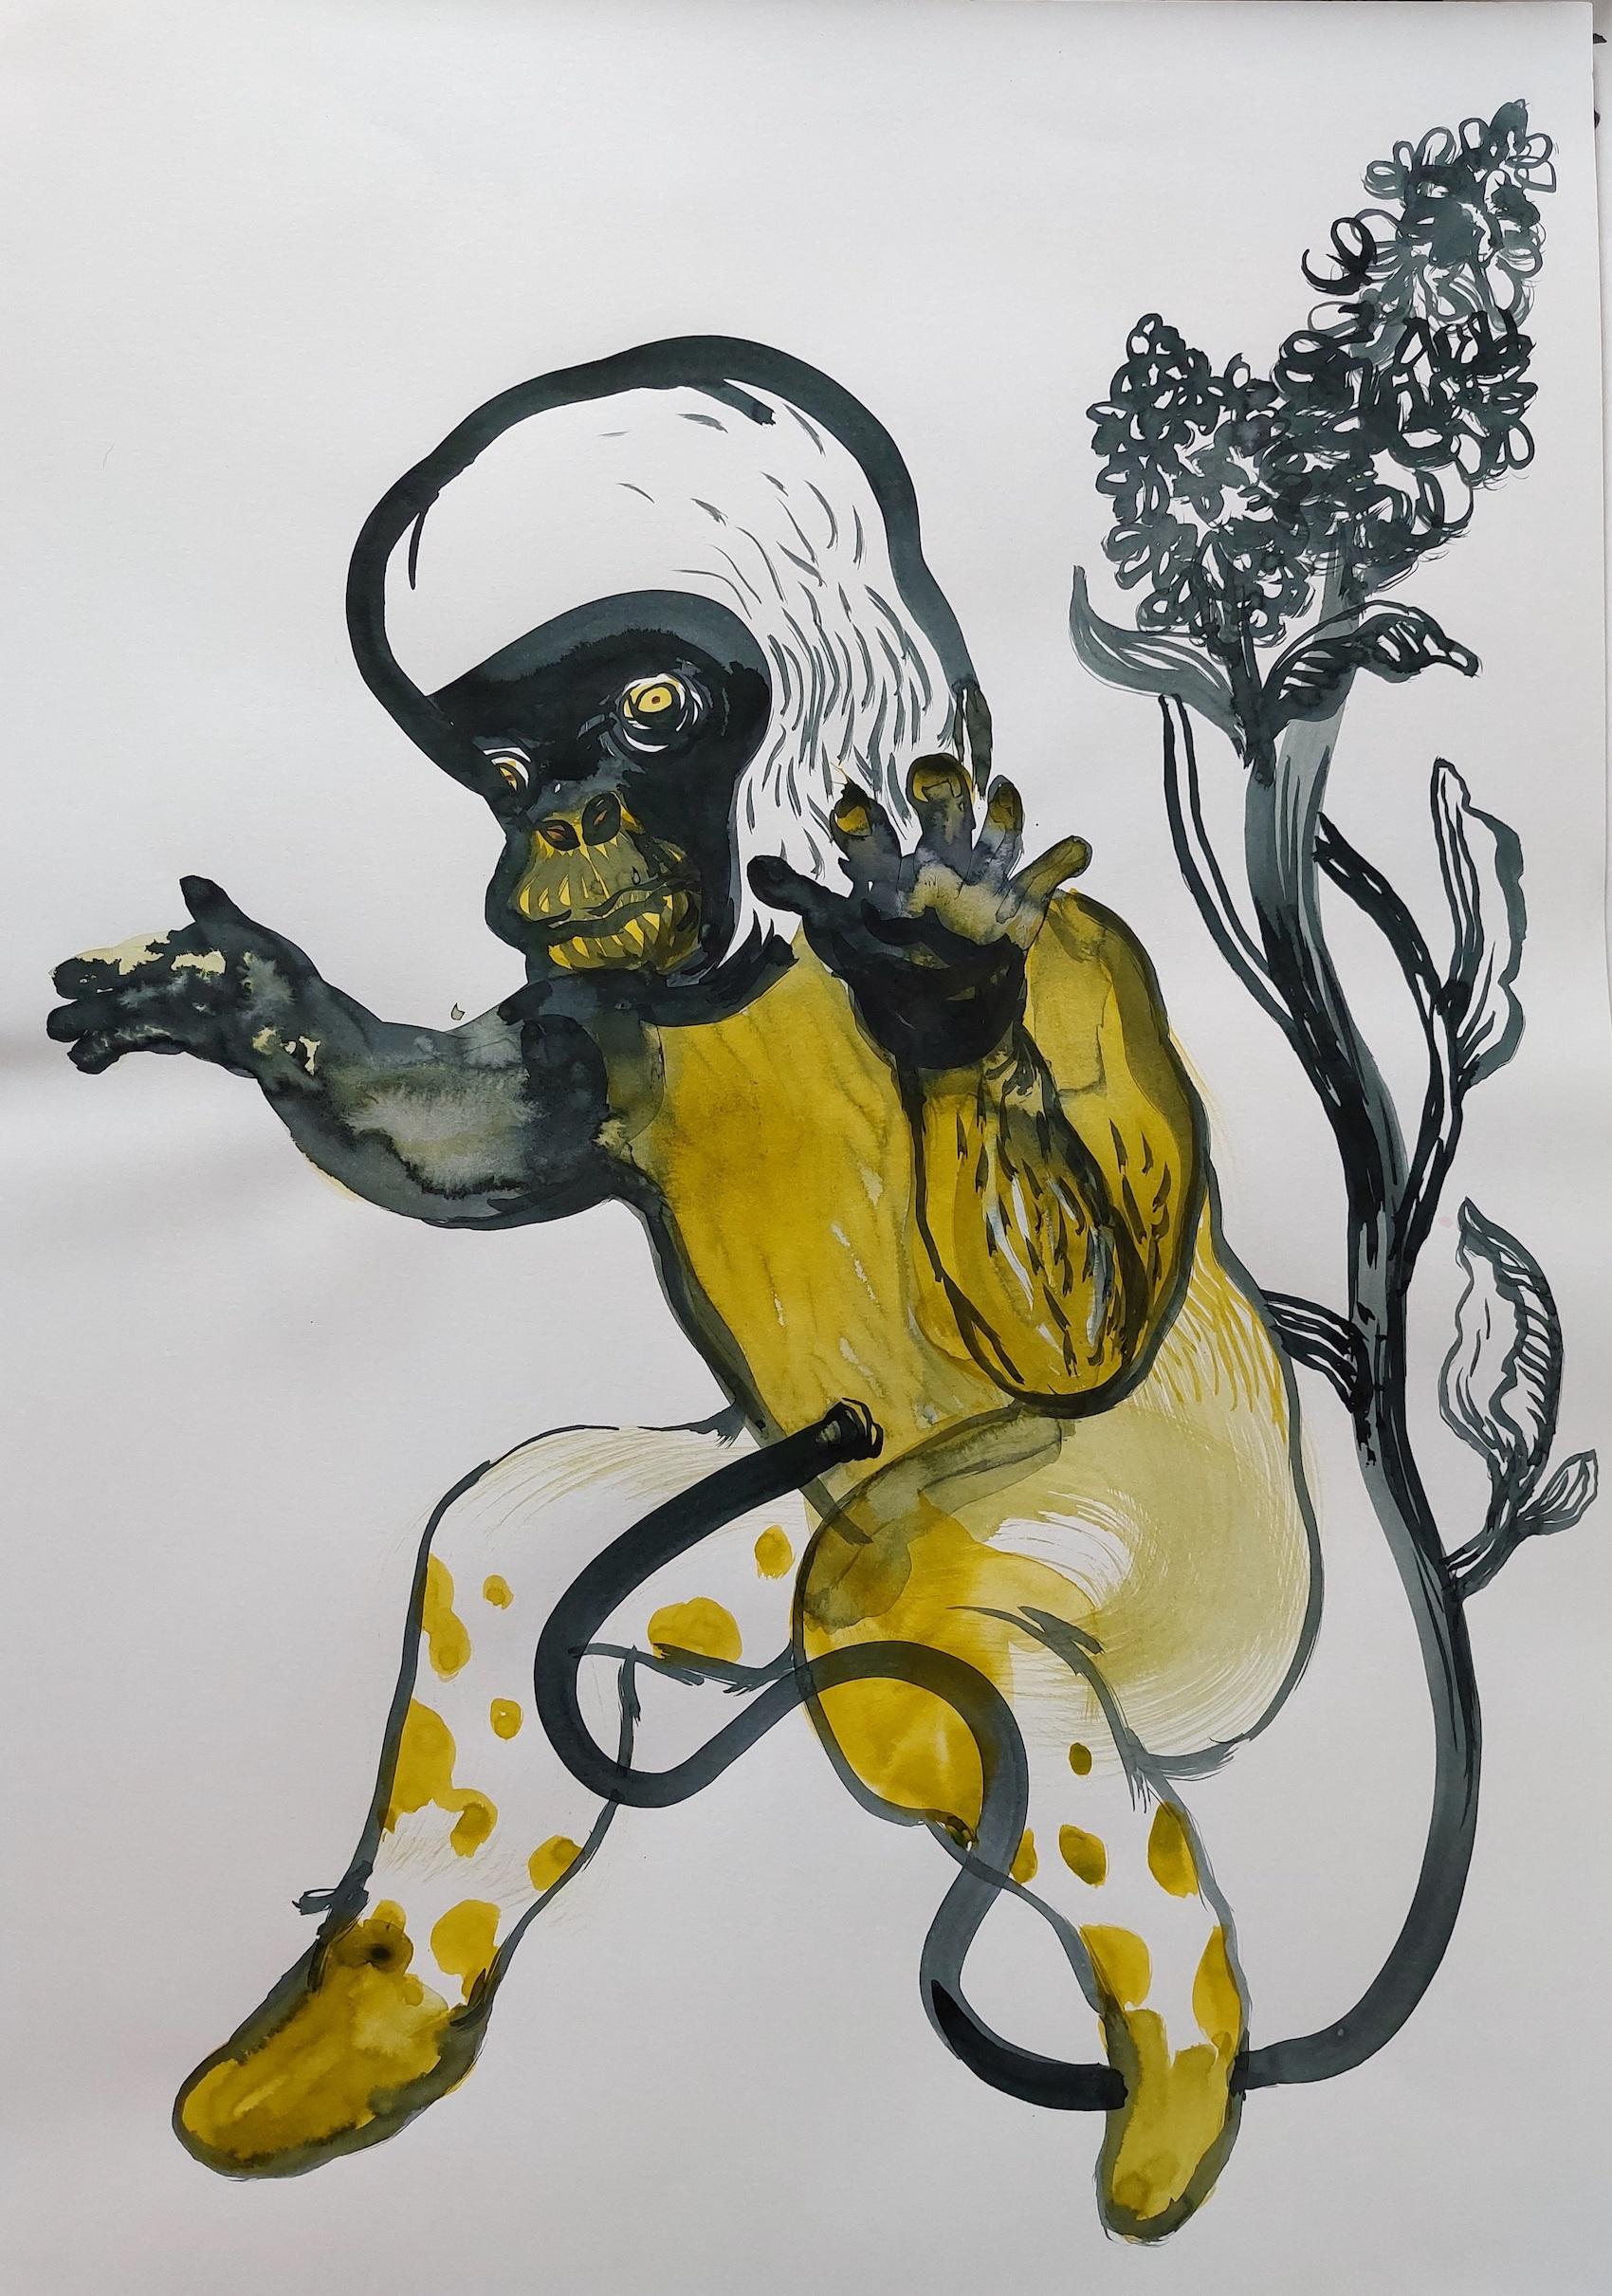 Grazyna Rigall Animal Painting - Yellow-Black Monkey - Figurative Ink Ecoline Painting, New Expression